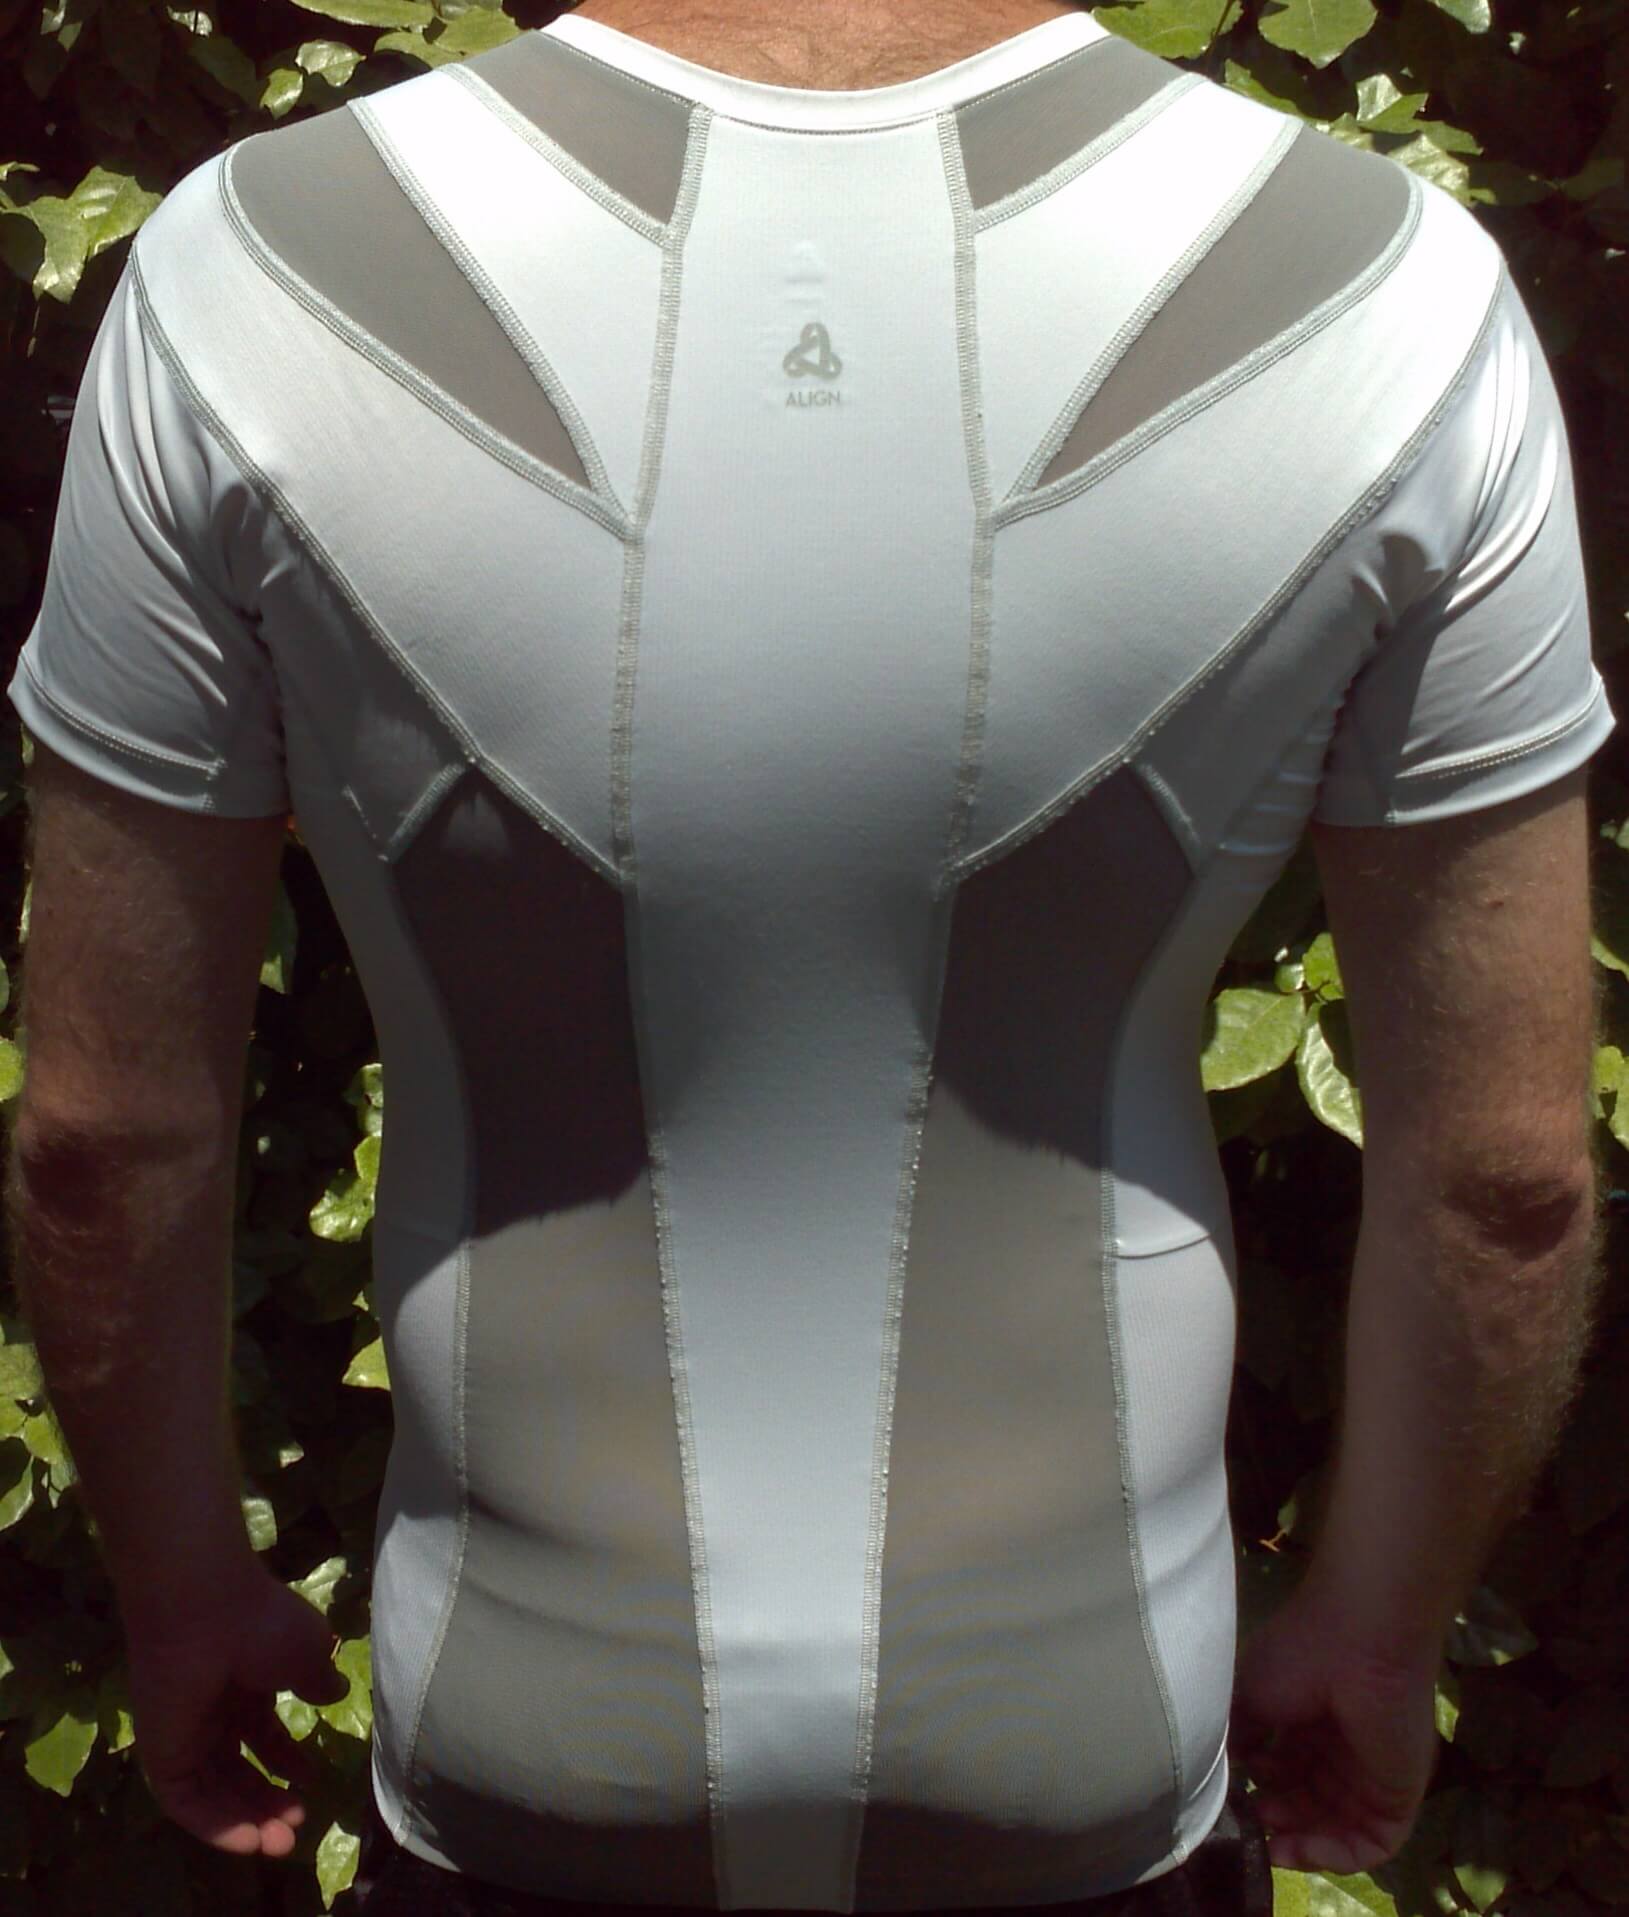 Achieve Better Posture With Posture Shirt 2.0: Tried & Tested